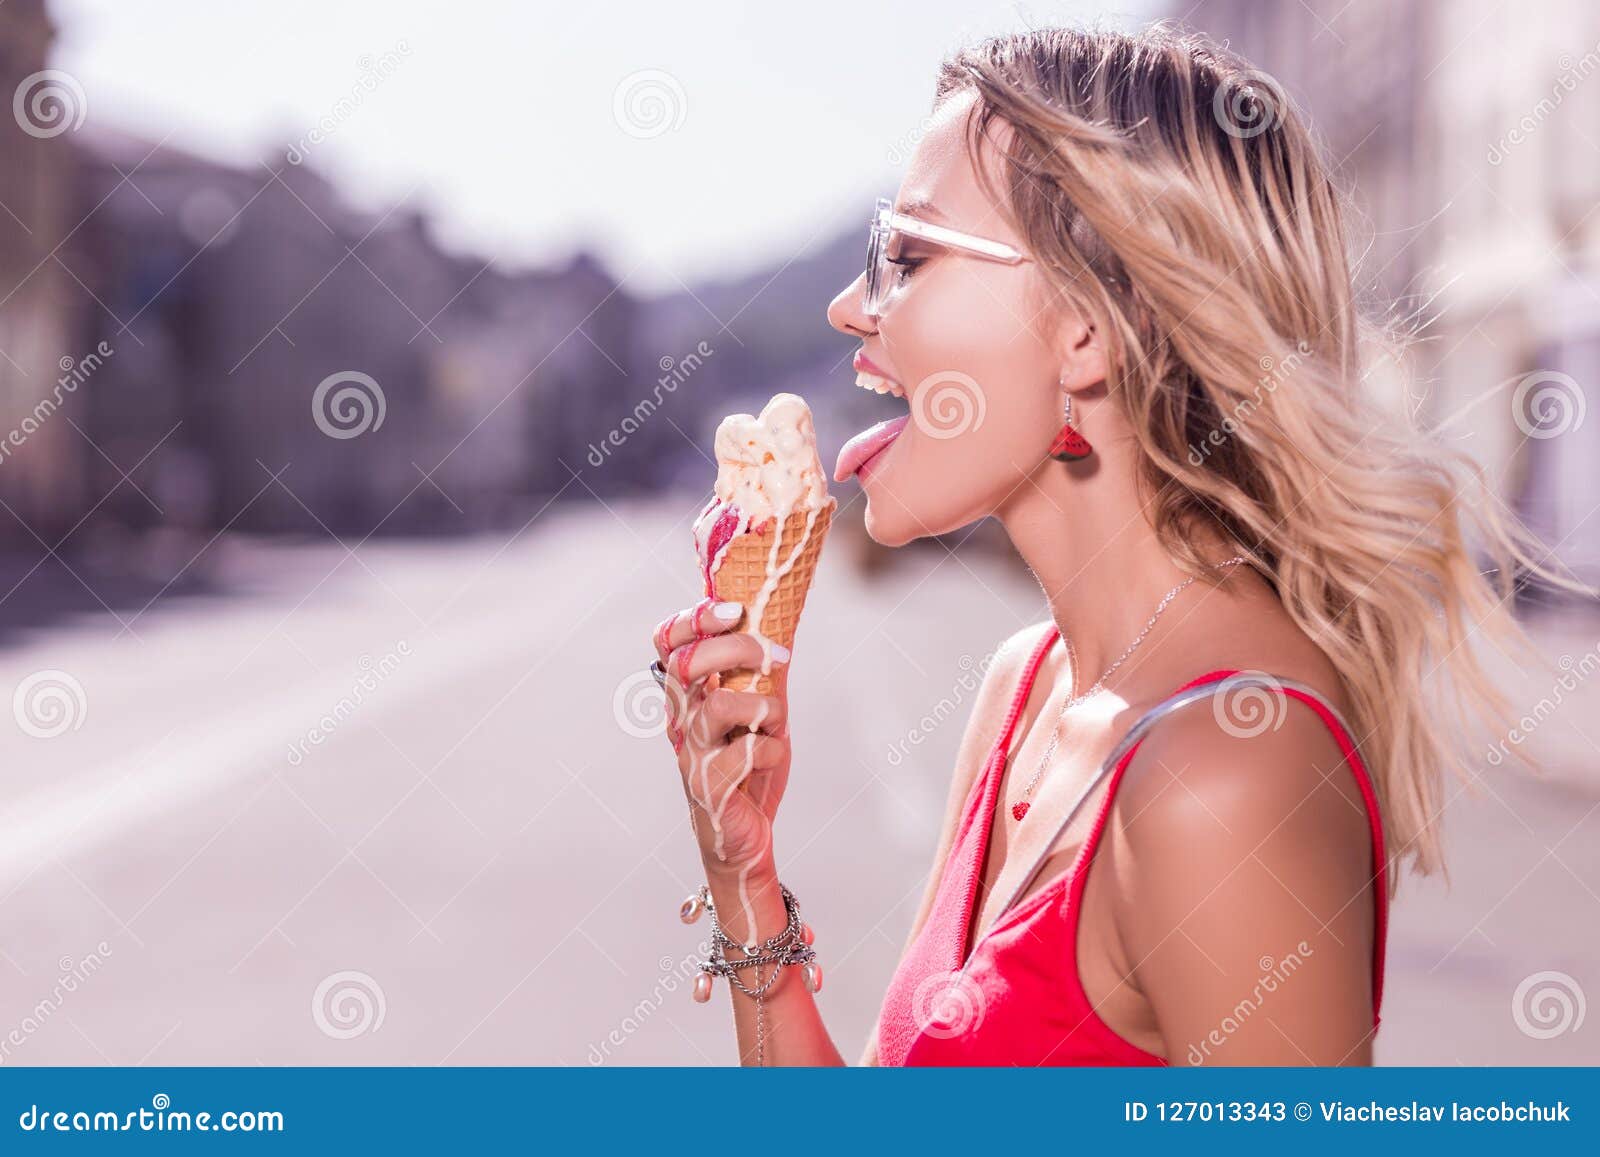 Joyful Attractive Young Woman Eating Her Ice Cream Stock Image Image Of Nutrition City 127013343 